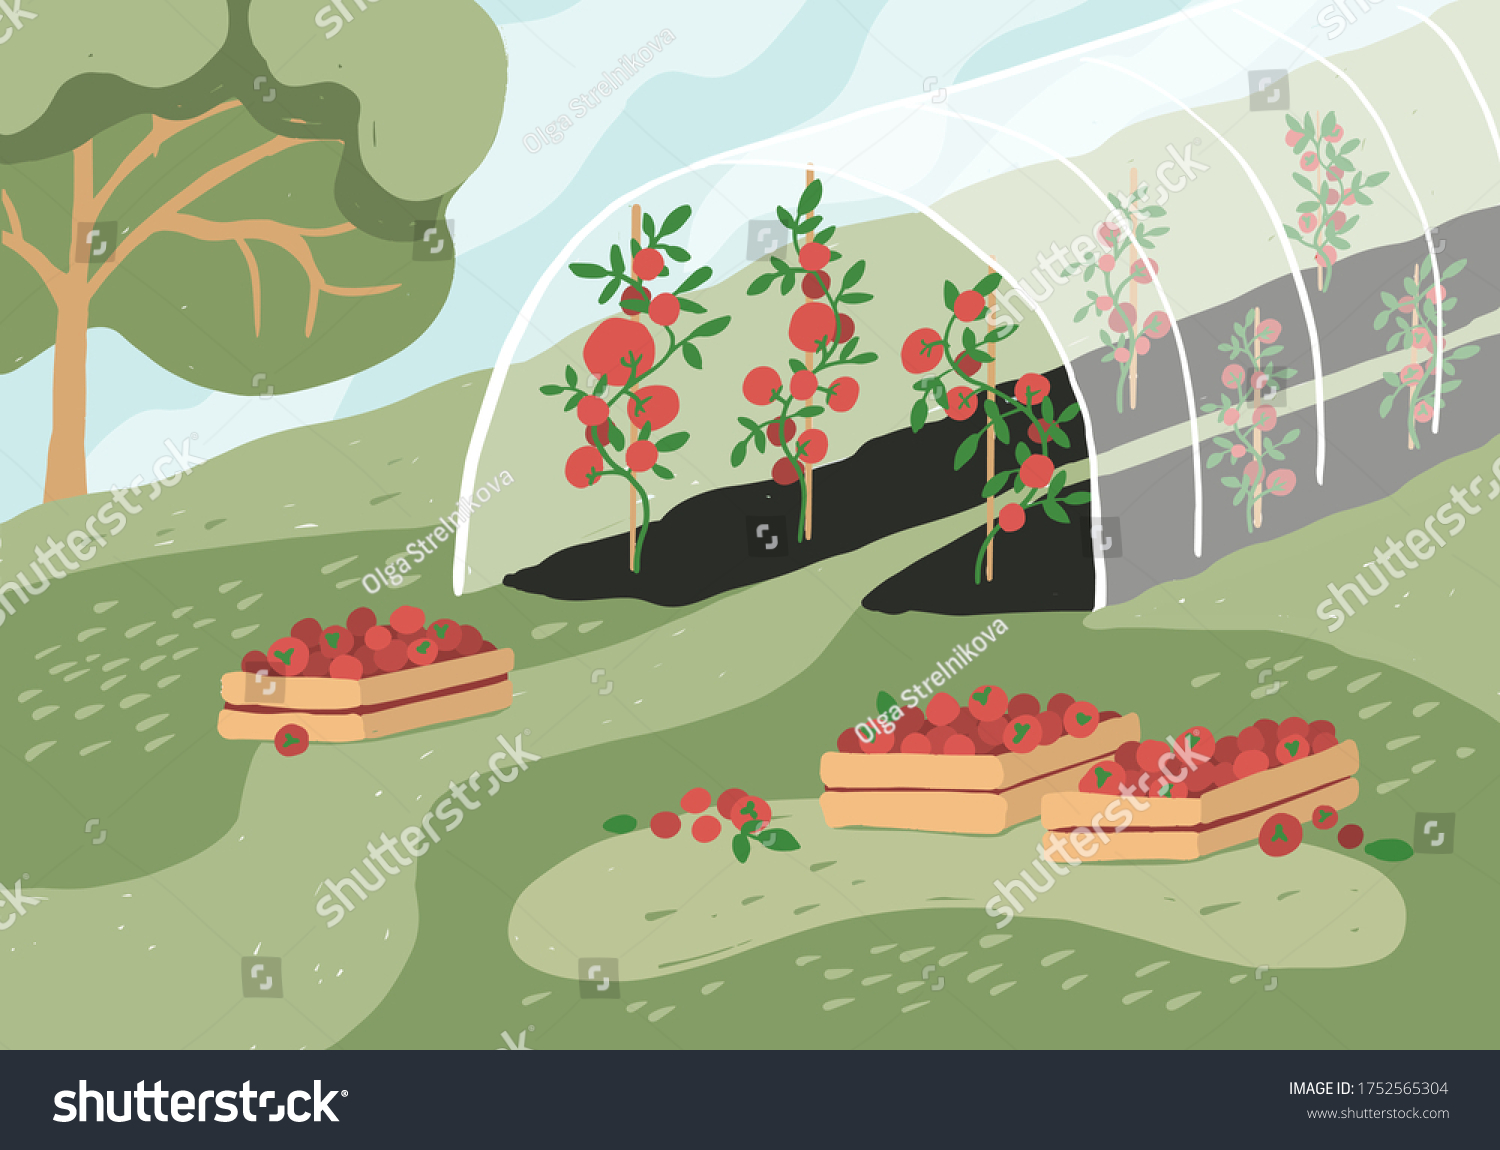 SVG of Greenhouse with tomato plants. Garden landscape. Harvest season. Wooden boxes with tomatoes on grass. Growing vegetables in agriculture. Gardening, horticulture, cultivated land vector illustration. svg